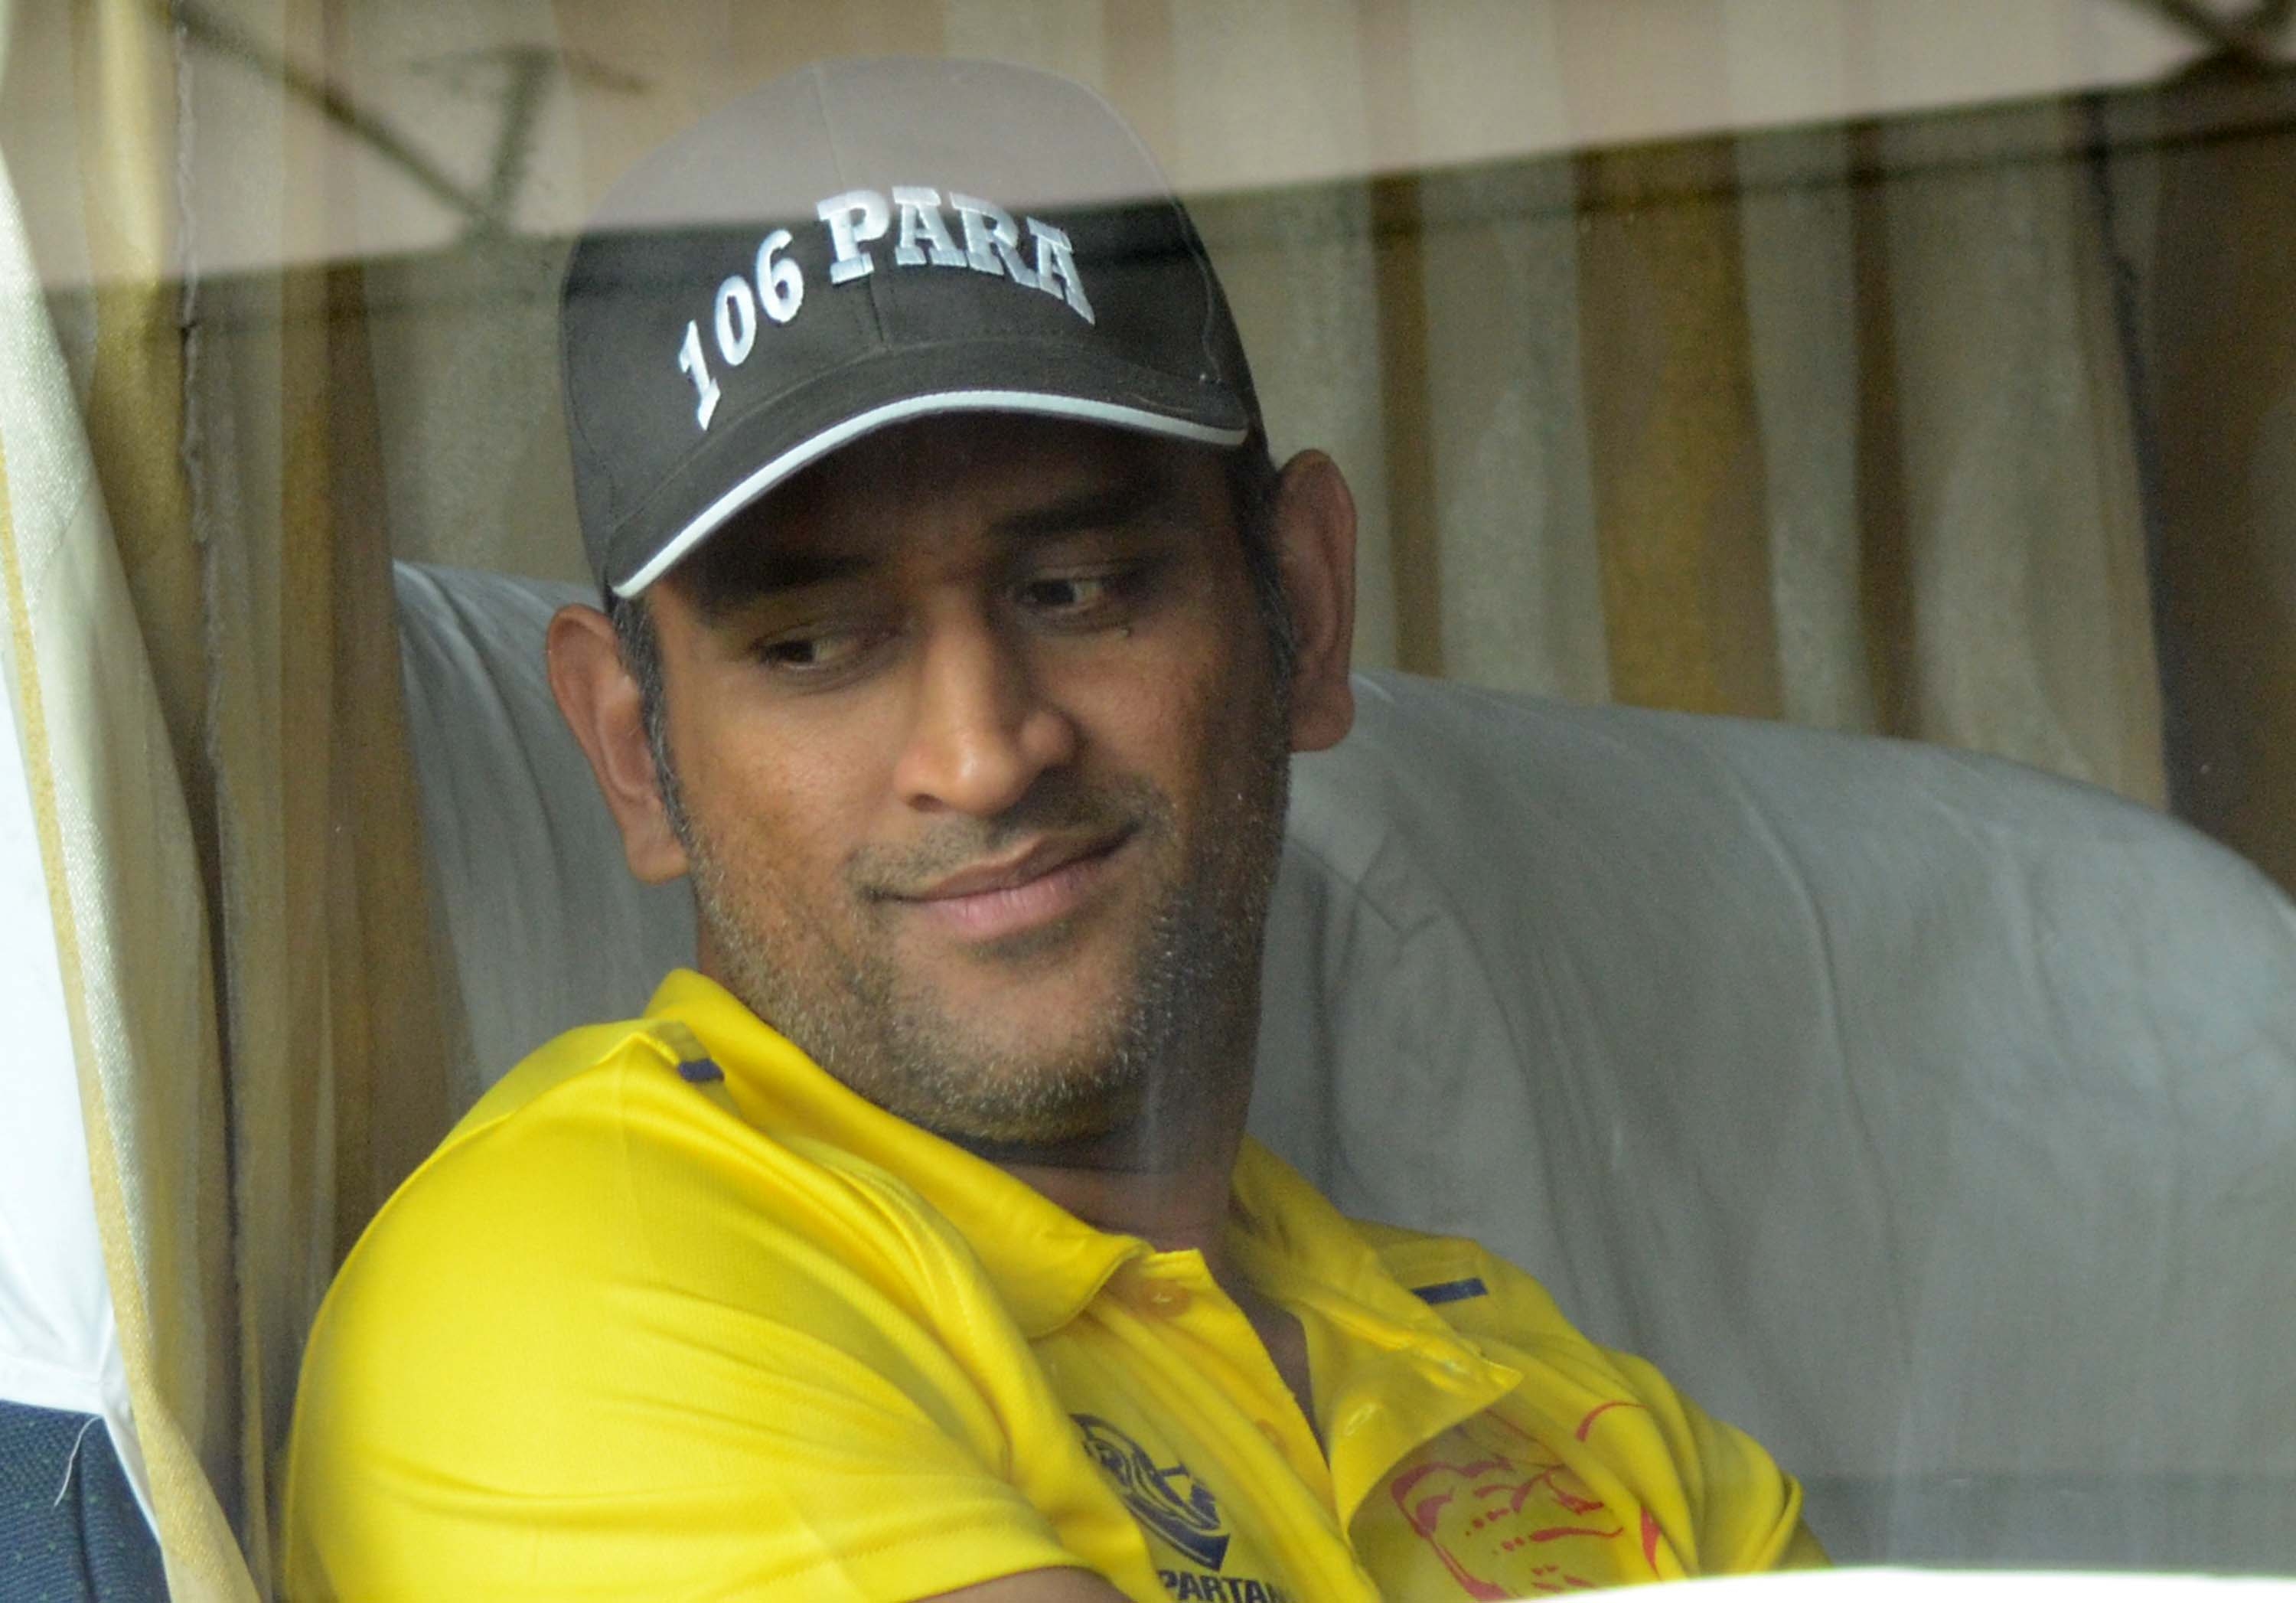 Fantastic Dhoni Cute Window Side Look Pose Free Desktop Background Mobile Pictures